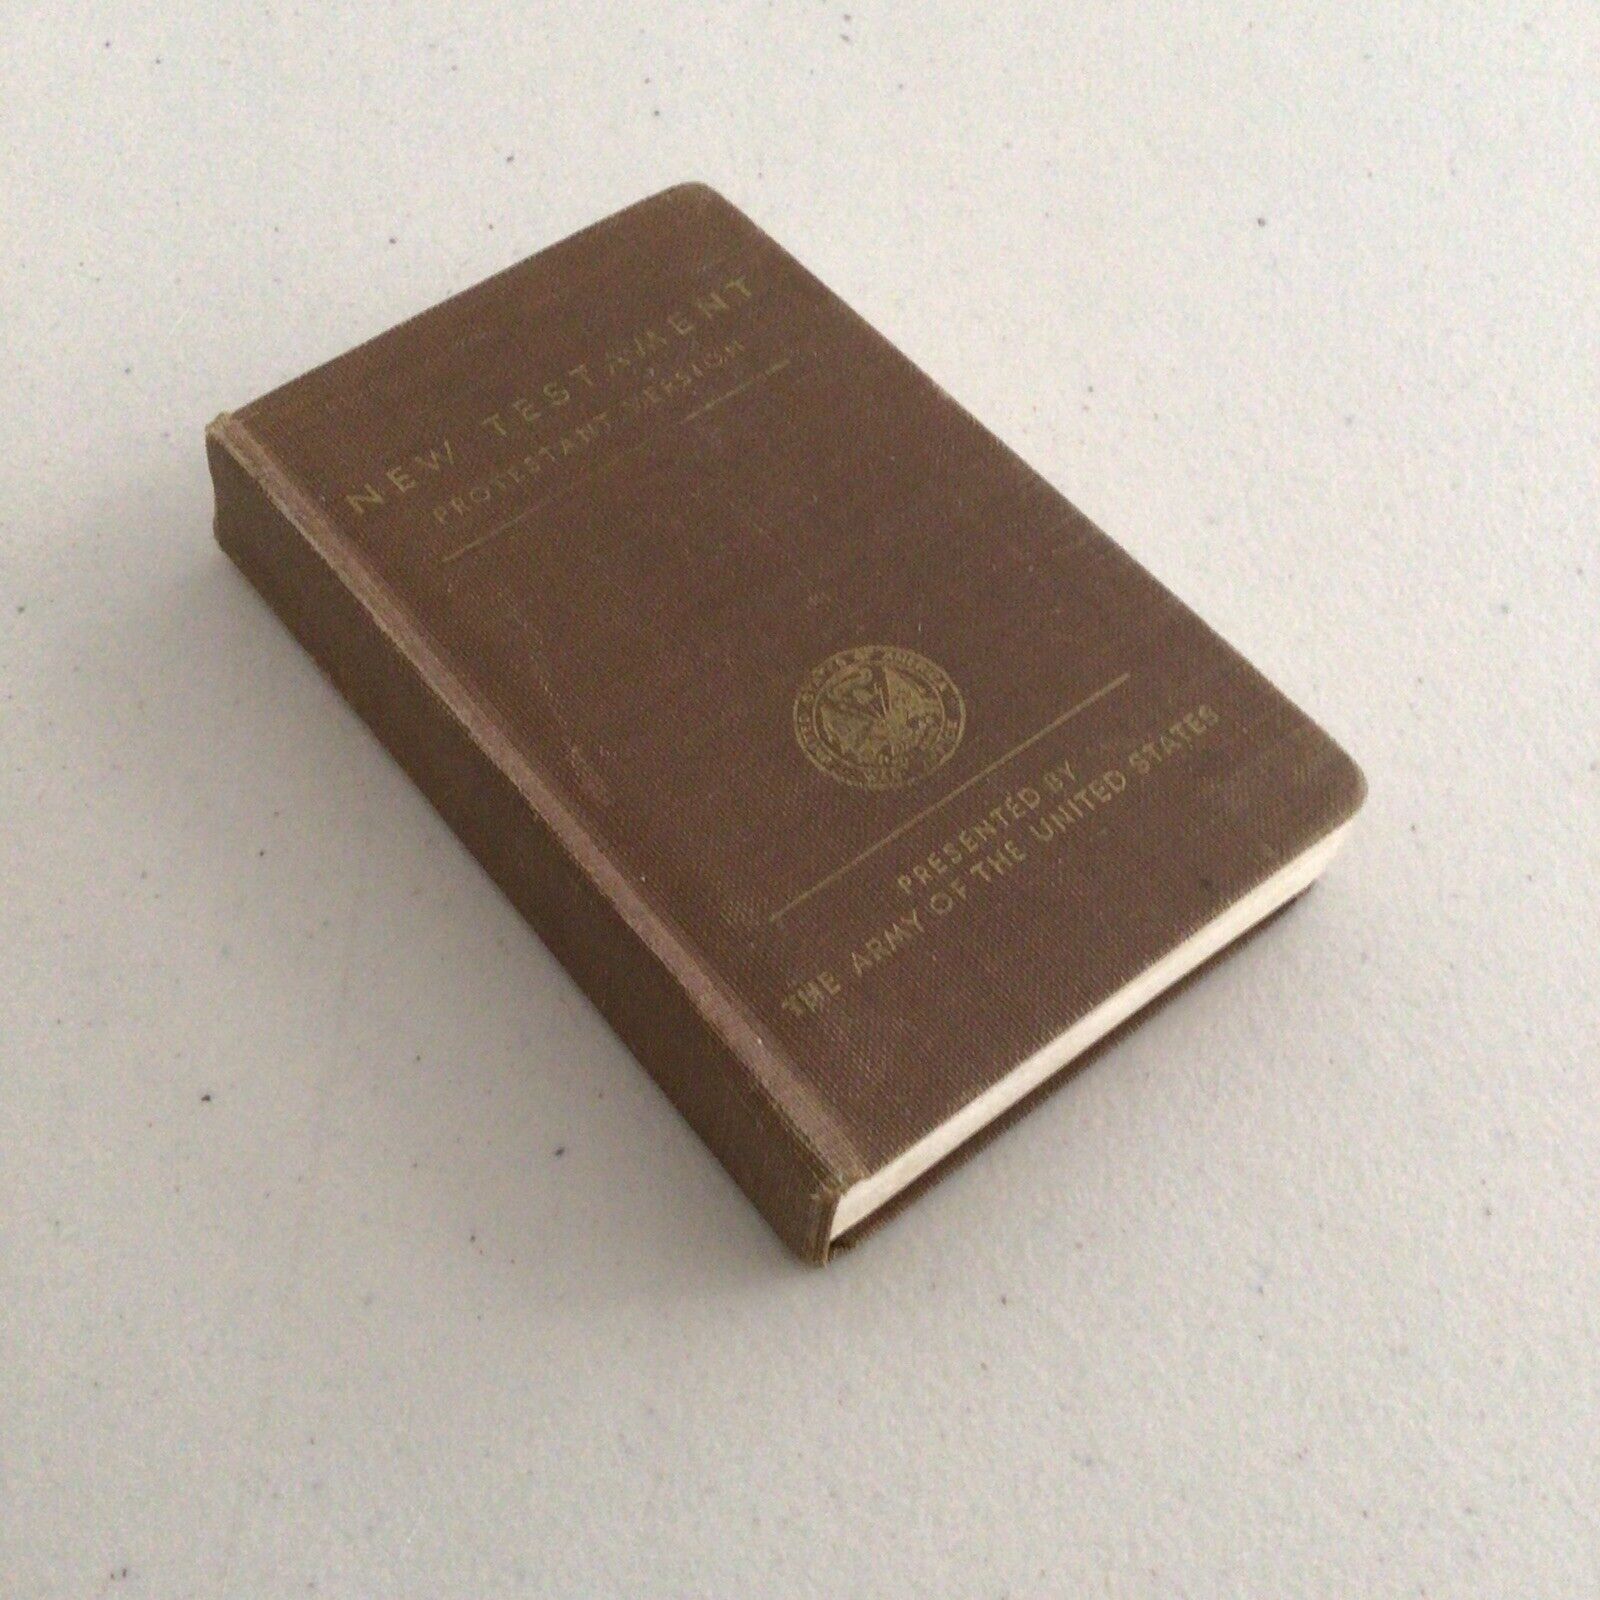 WWII POCKET NEW TESTAMENT,PROTESTANT VERSION,US ARMY,PRINTED 1942,FDR FORWARD